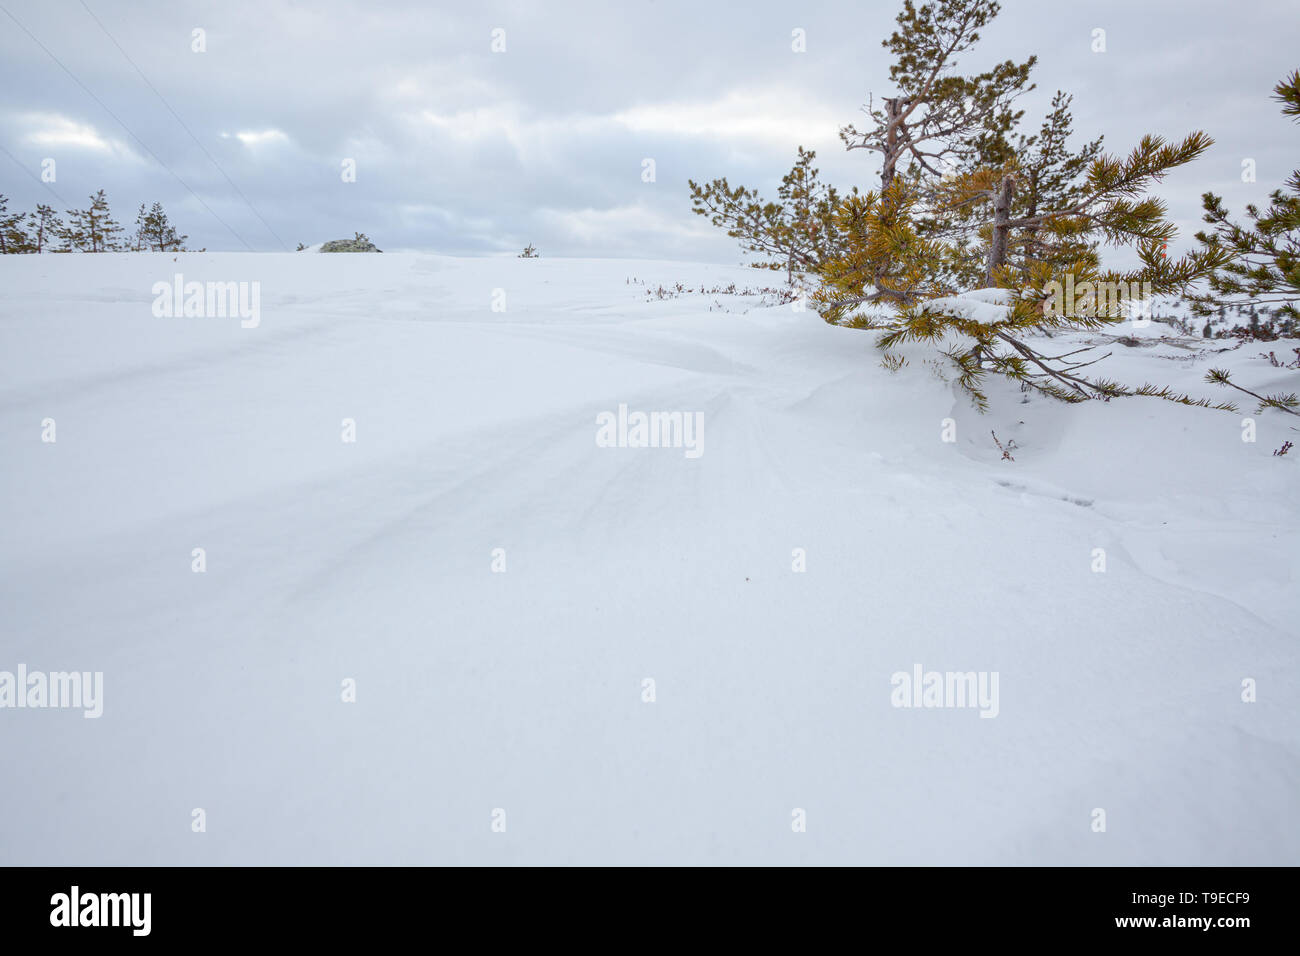 Snow and trees in arctic hill Stock Photo